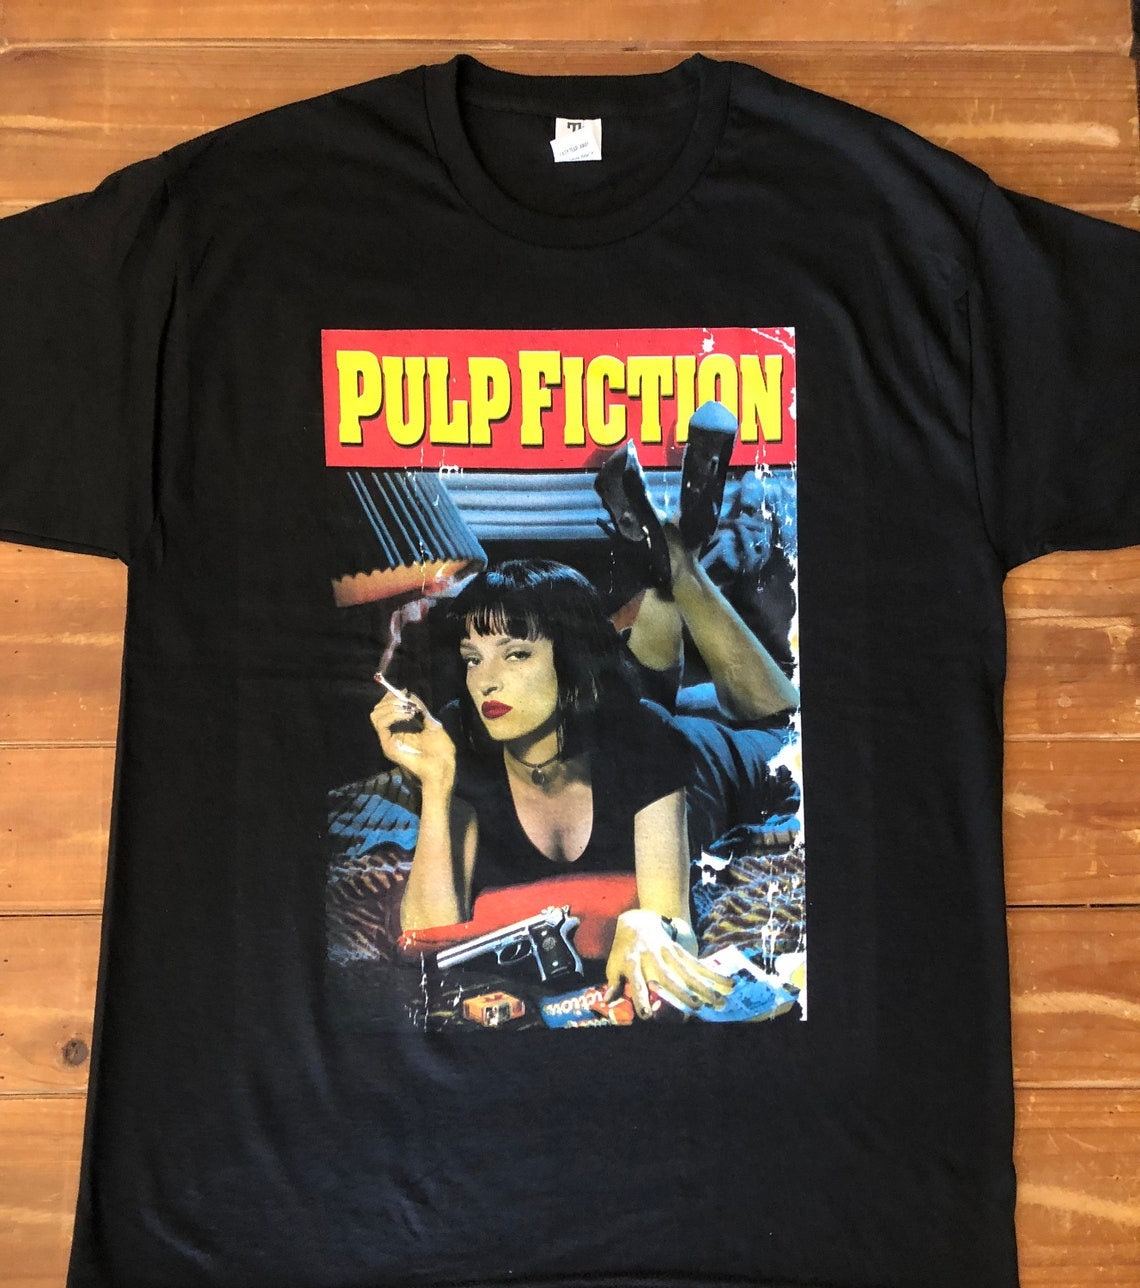 Pulp Fiction Poster Mia Wallace By Quentin Tarantino  Gift Tee for Men Women Unisex T-Shirt